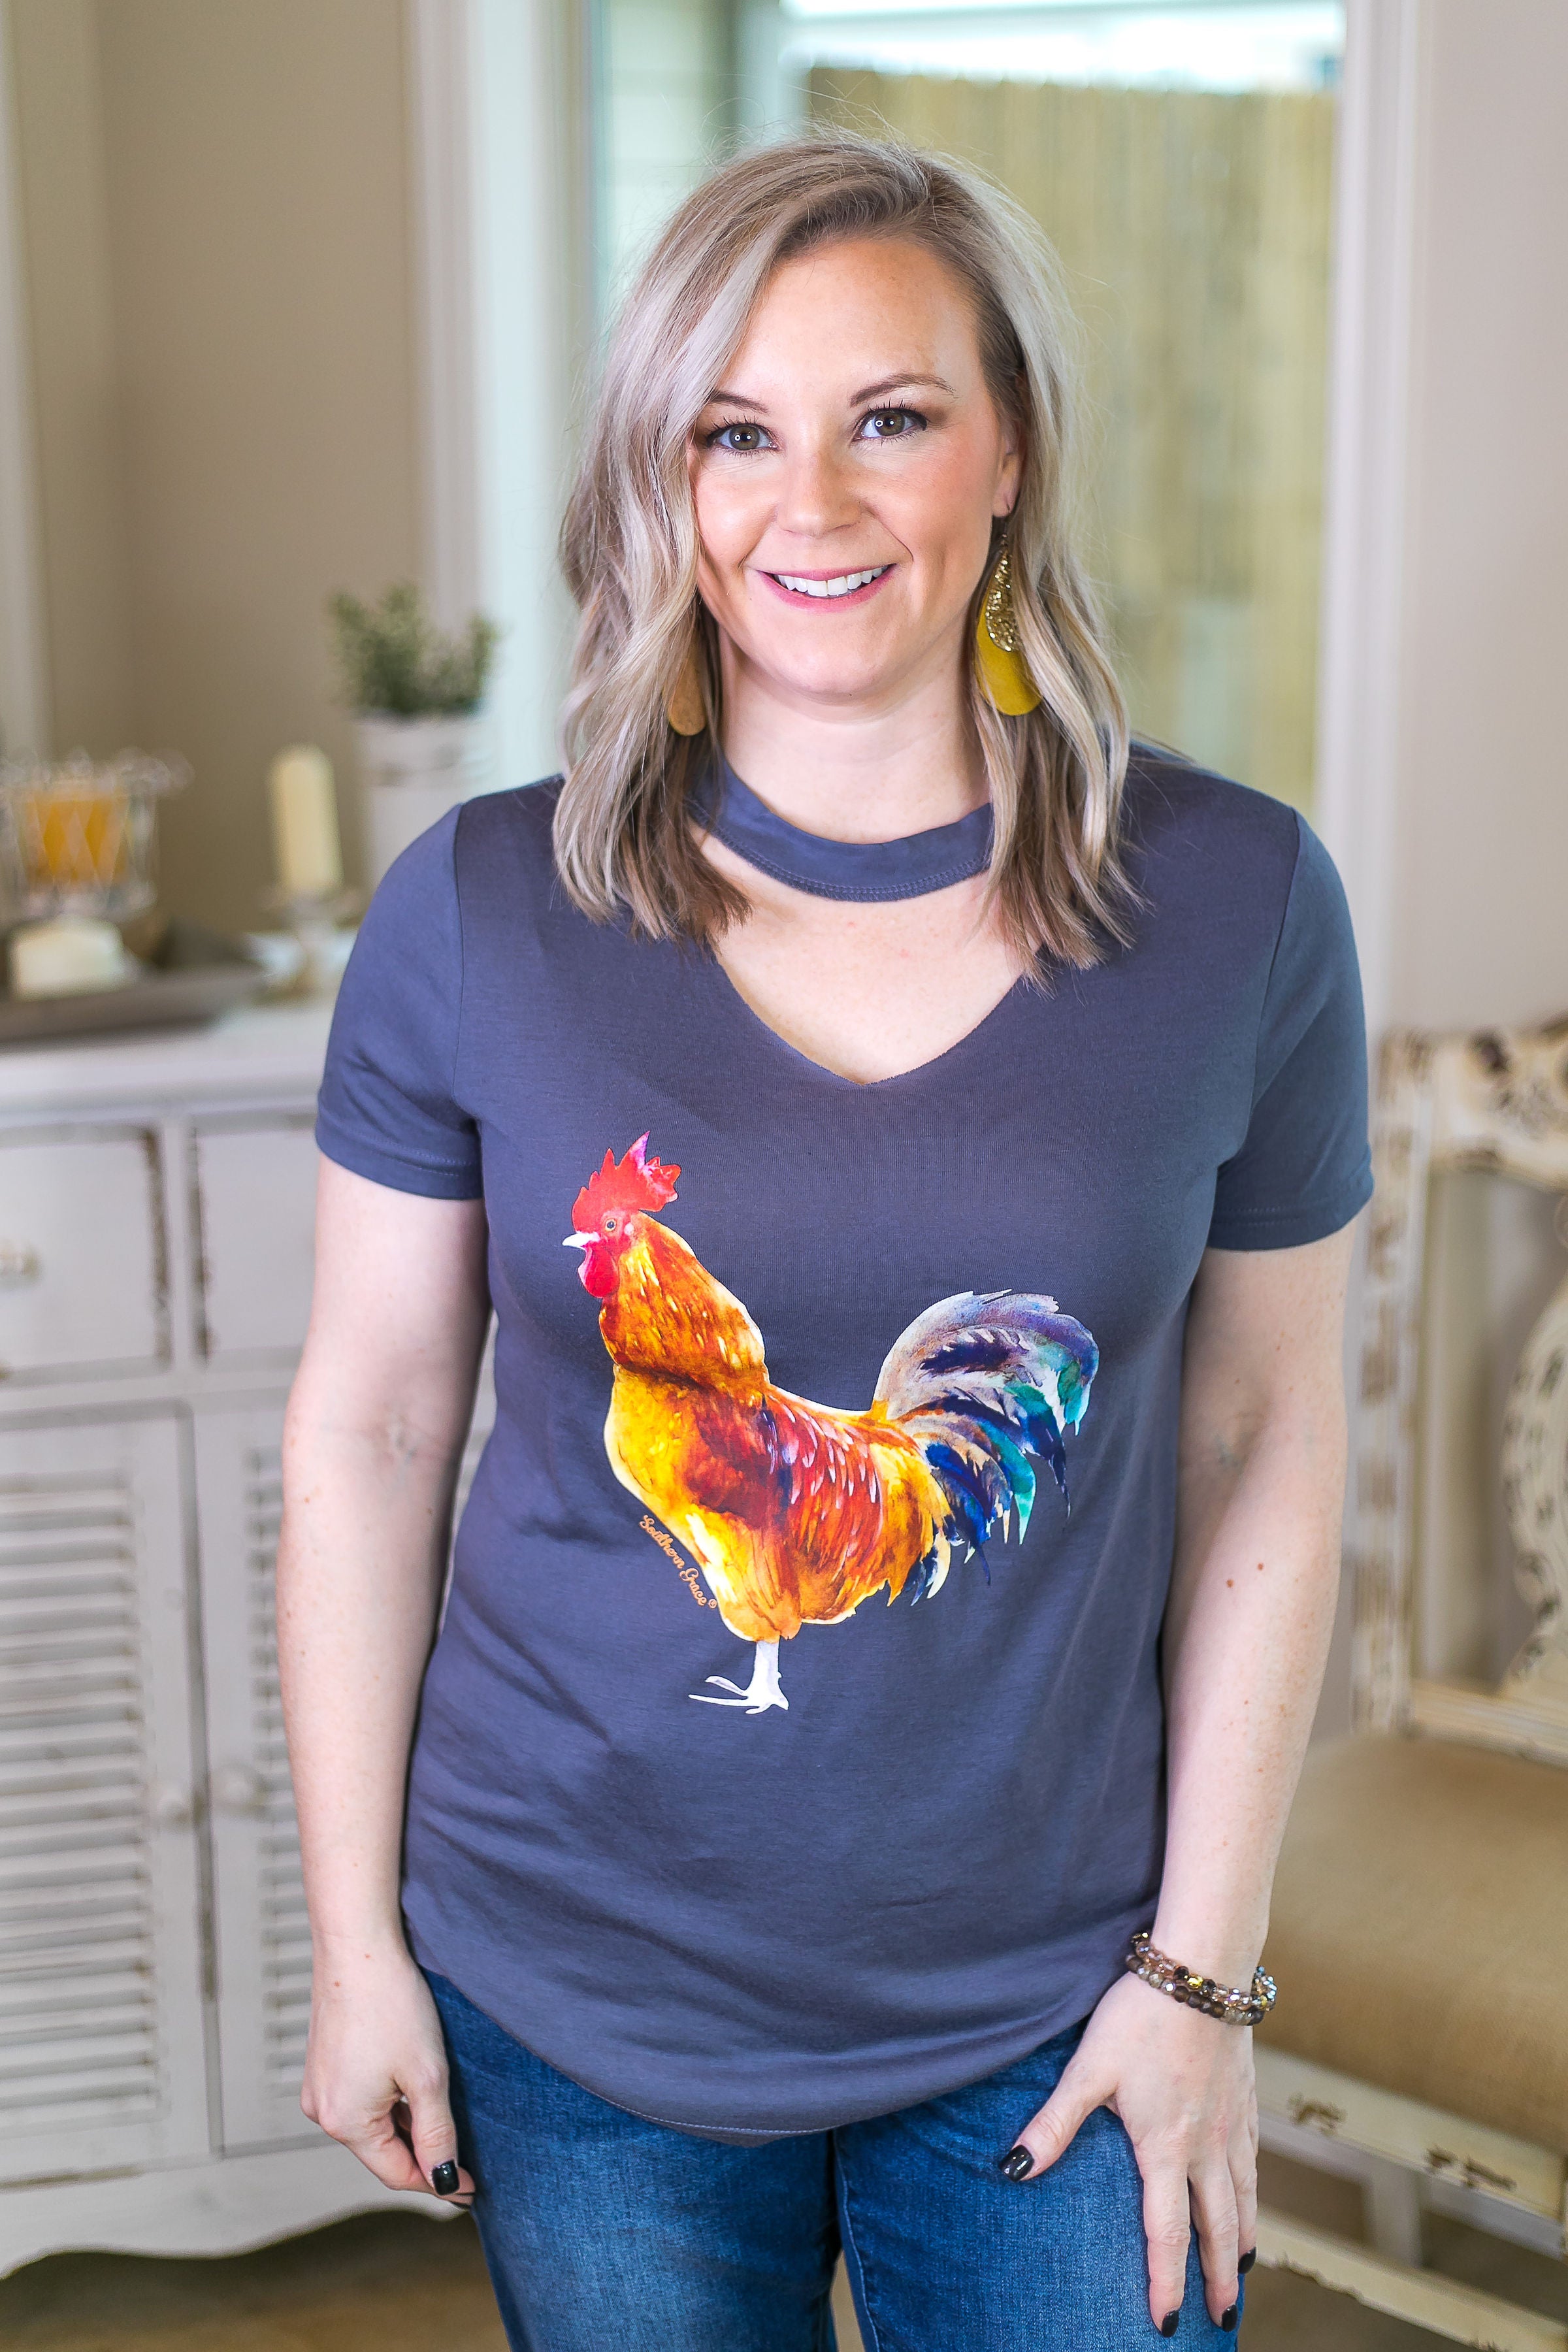 Last Chance Size Small & Med. | Rule The Roost Watercolor Rooster Tee with Keyhole Cutout in Charcoal - Giddy Up Glamour Boutique